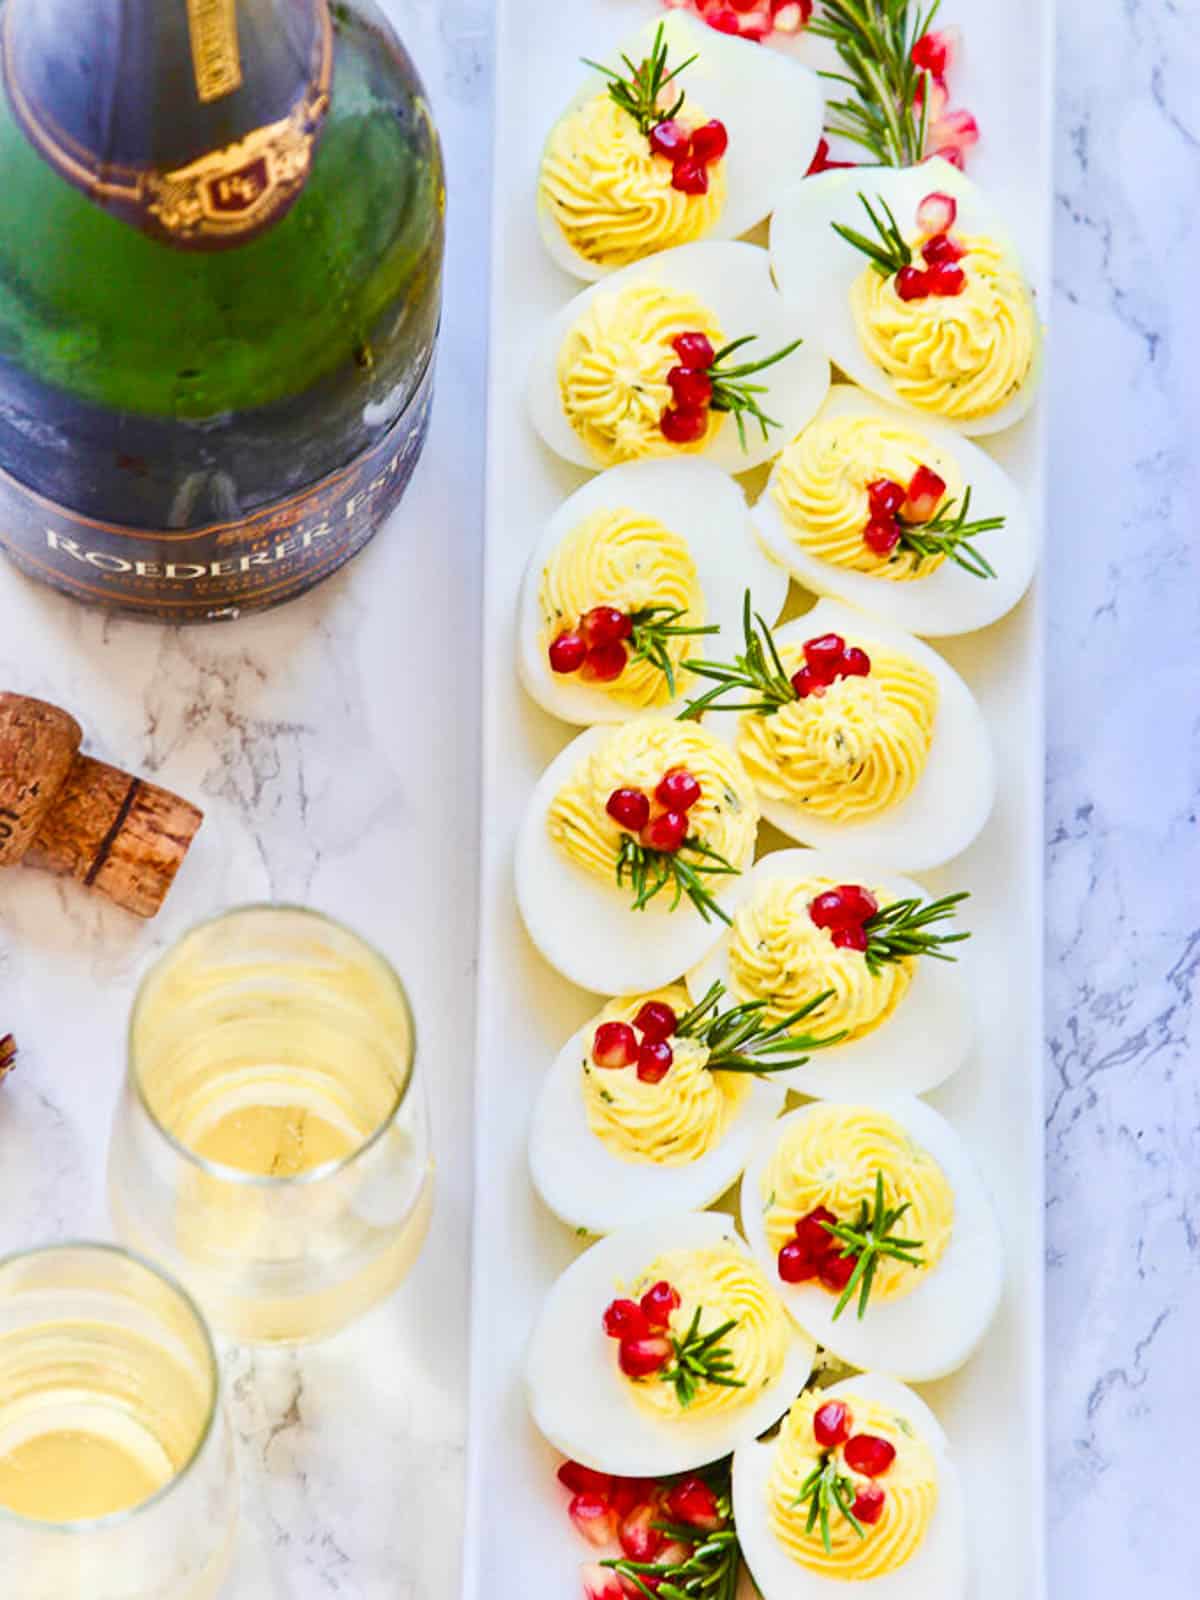 https://www.delicioustable.com/wp-content/uploads/2022/12/Holiday-Deviled-Eggs-with-champagne-copy.jpg